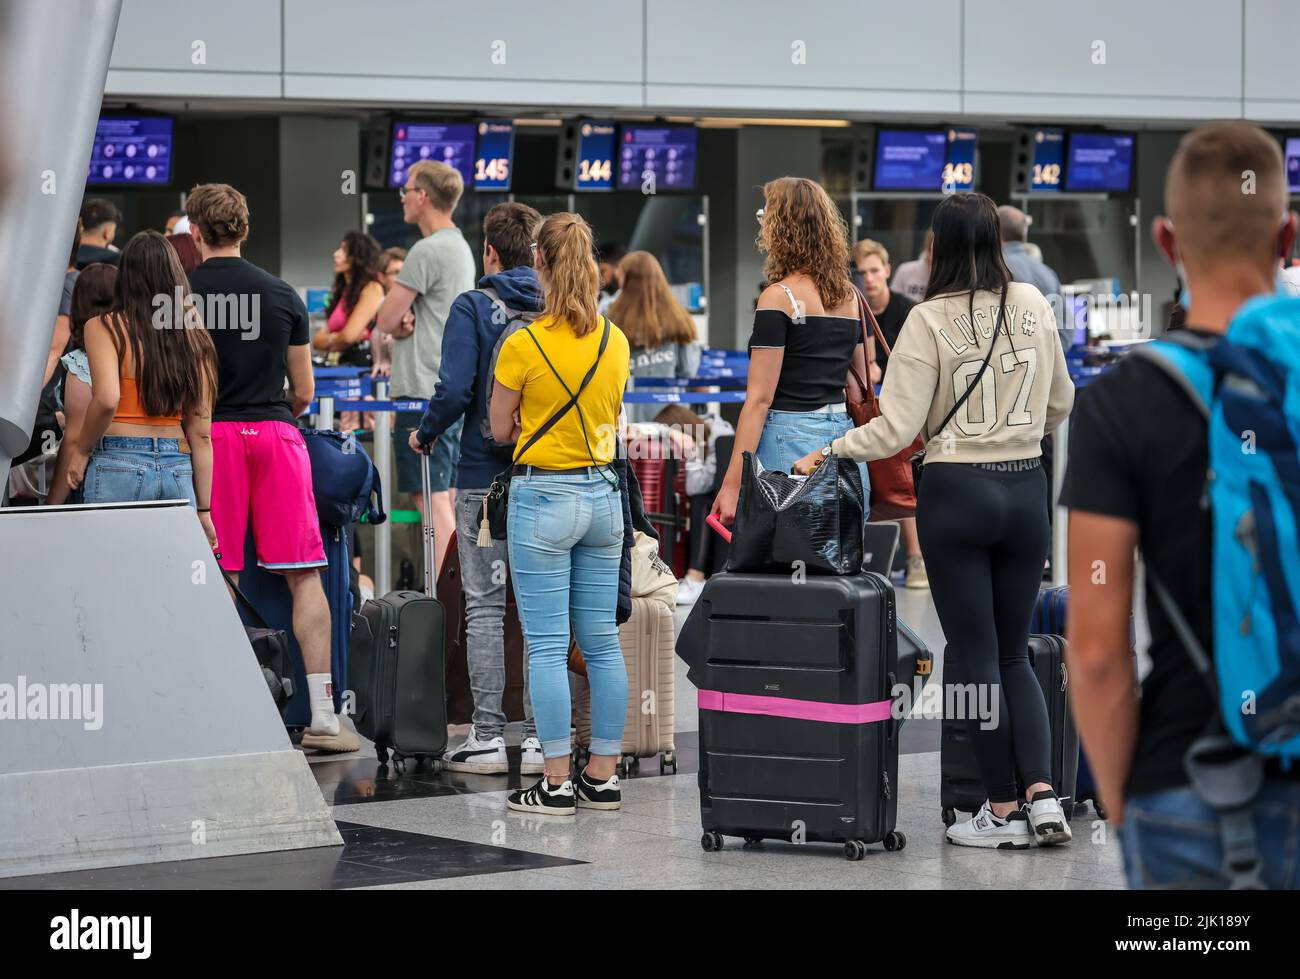 Duesseldorf, North Rhine-Westphalia, Germany - Duesseldorf airport, vacationers stand with suitcases at the check-in counter on the day of the warning Stock Photo